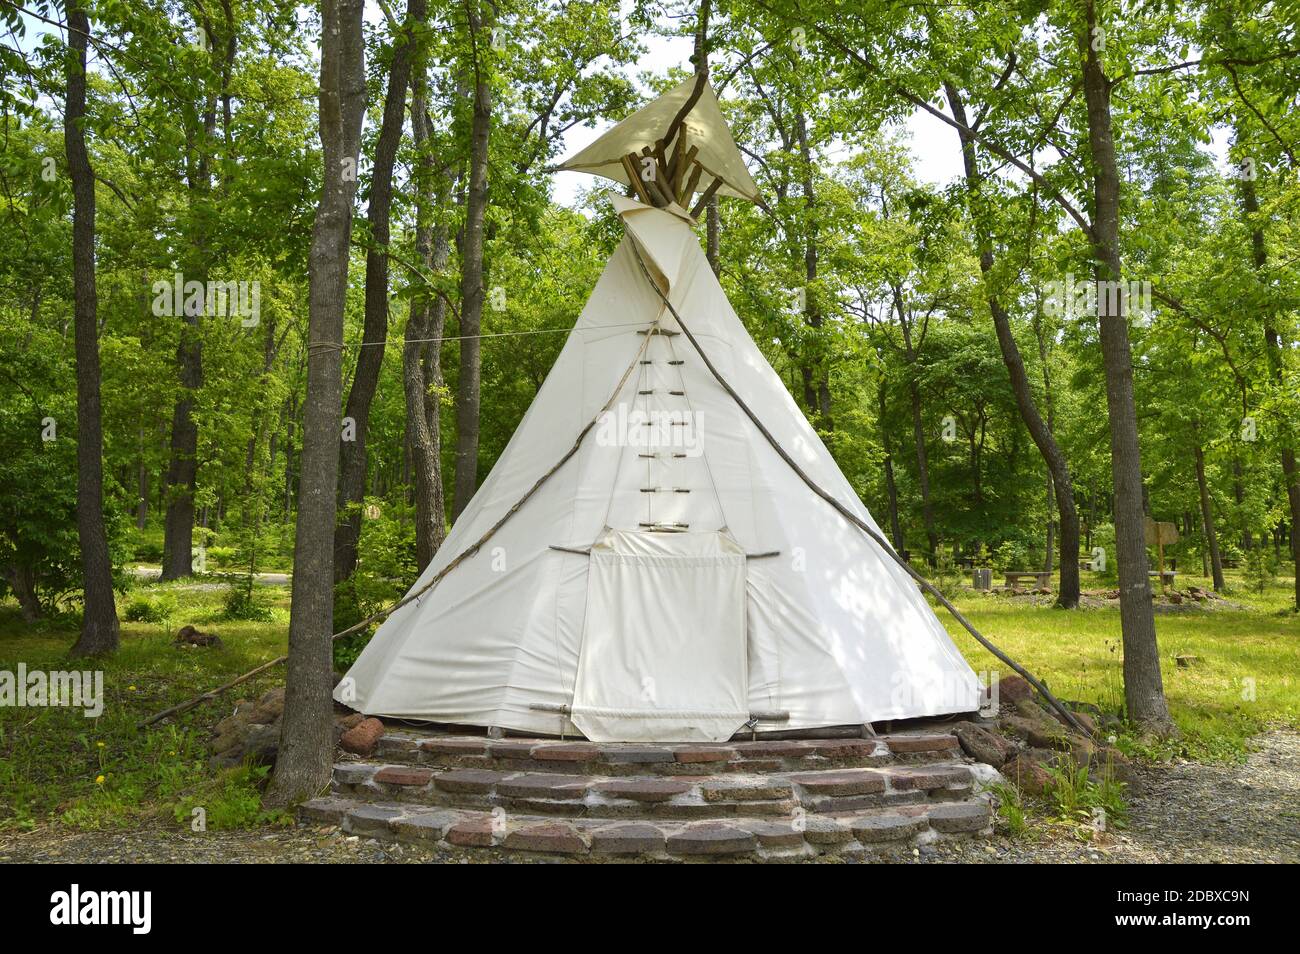 Native American wigwam made of fabric covered branches in forest Stock Photo